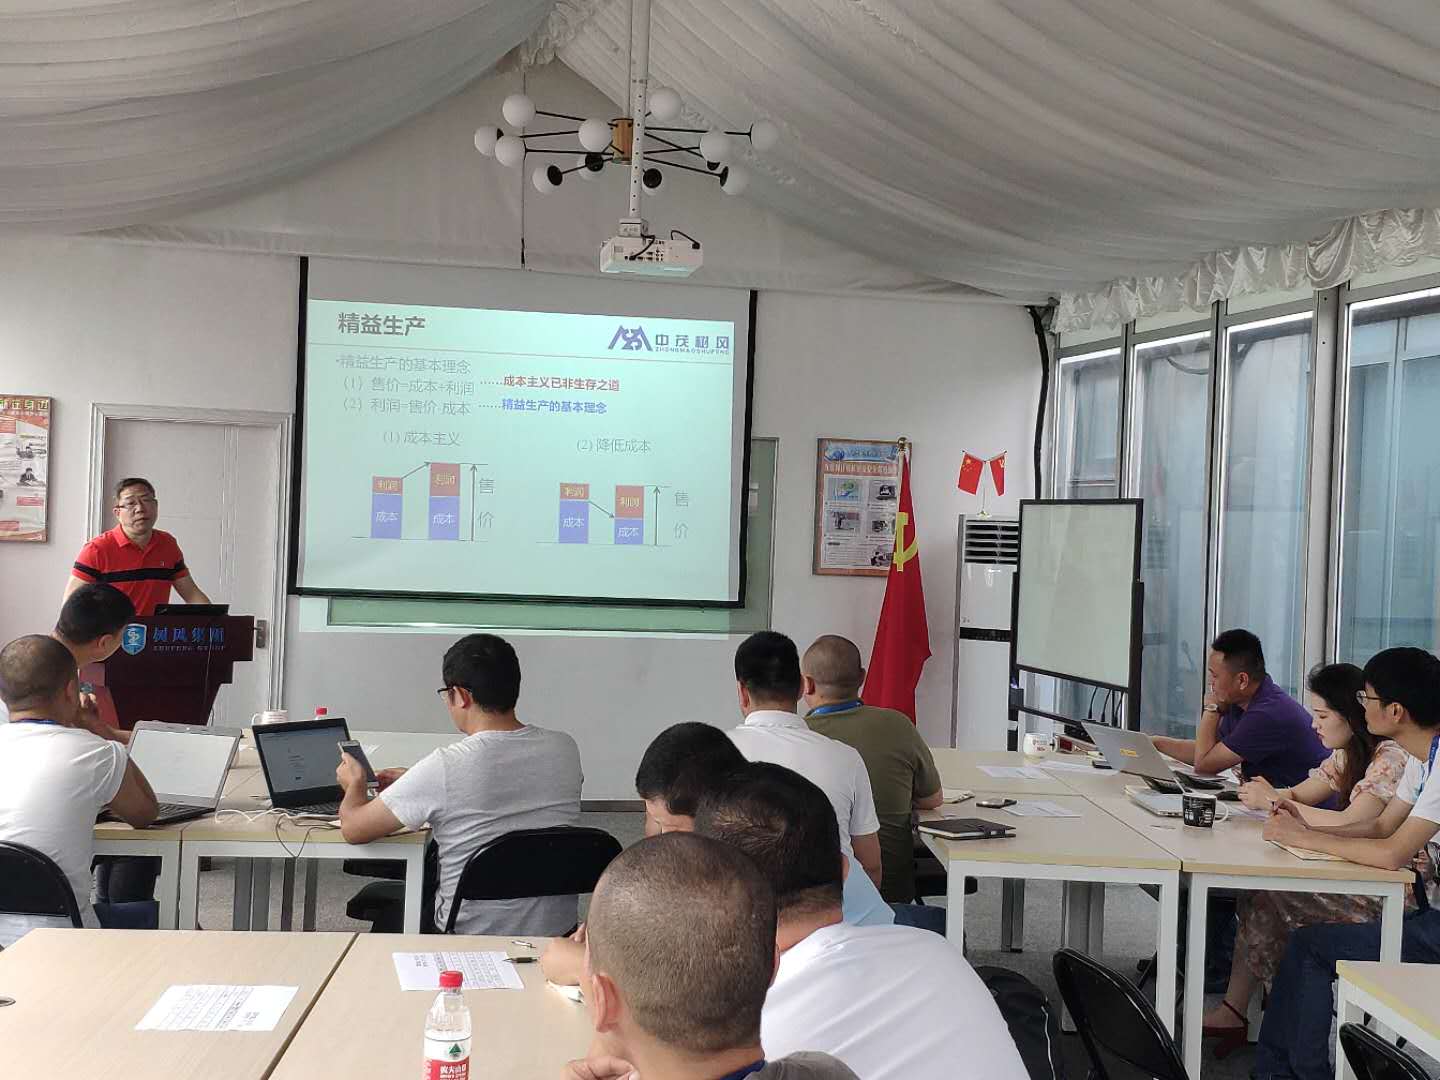 Shufeng Group‘s mid-year supervisor training meeting was successfully held